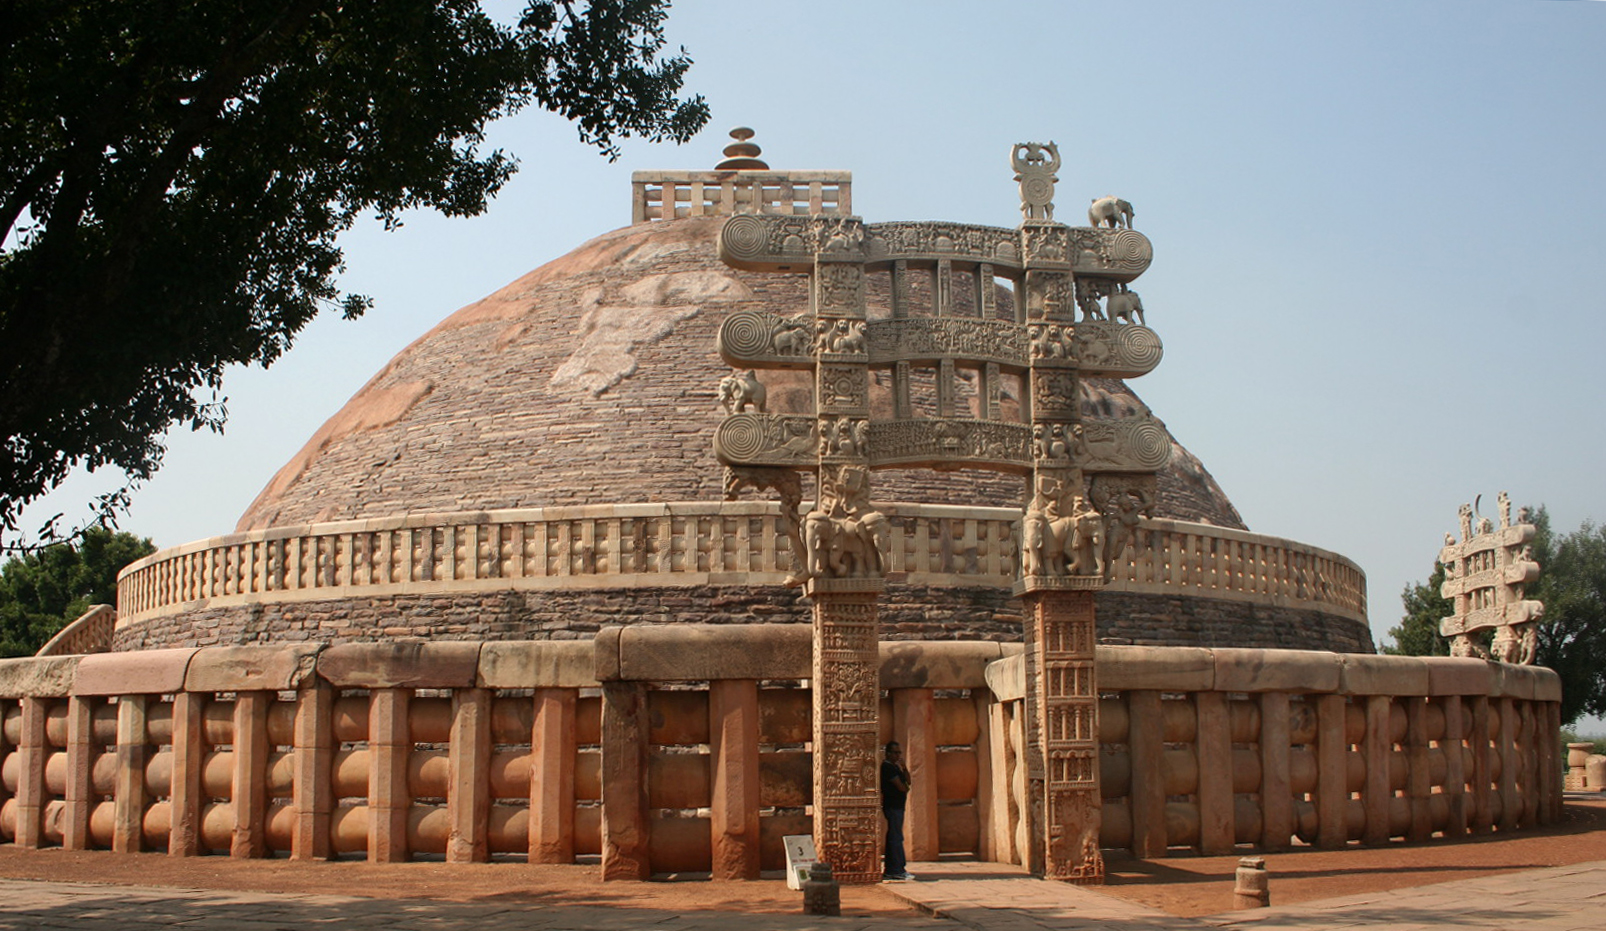 One of the most famous stupas, the Great Stupa (Mahastupa) in Madya Pradesh, India was built at the birthplace of Ashoka’s wife, Devi, daughter of a local merchant in the village of Sanchi located on an important trade route (photo: Nagarjun Kandukuru, CC BY 2.0)